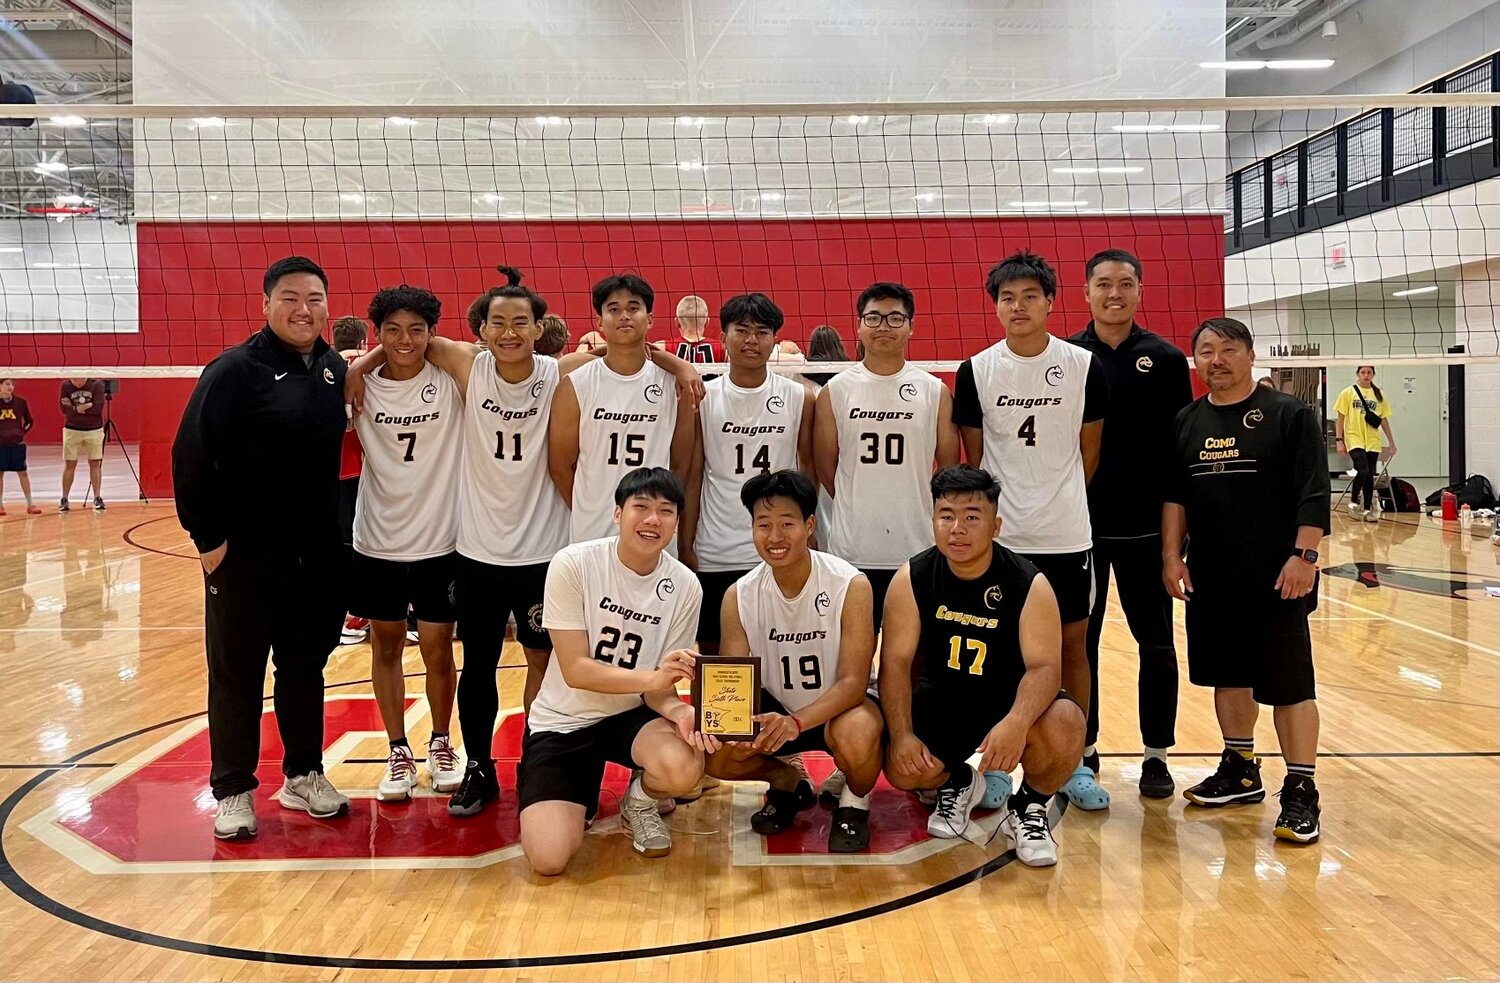 The Como Park boys’ volleyball team earned the sixth place trophy at the Minnesota High School Volleyball Association State Tournament.